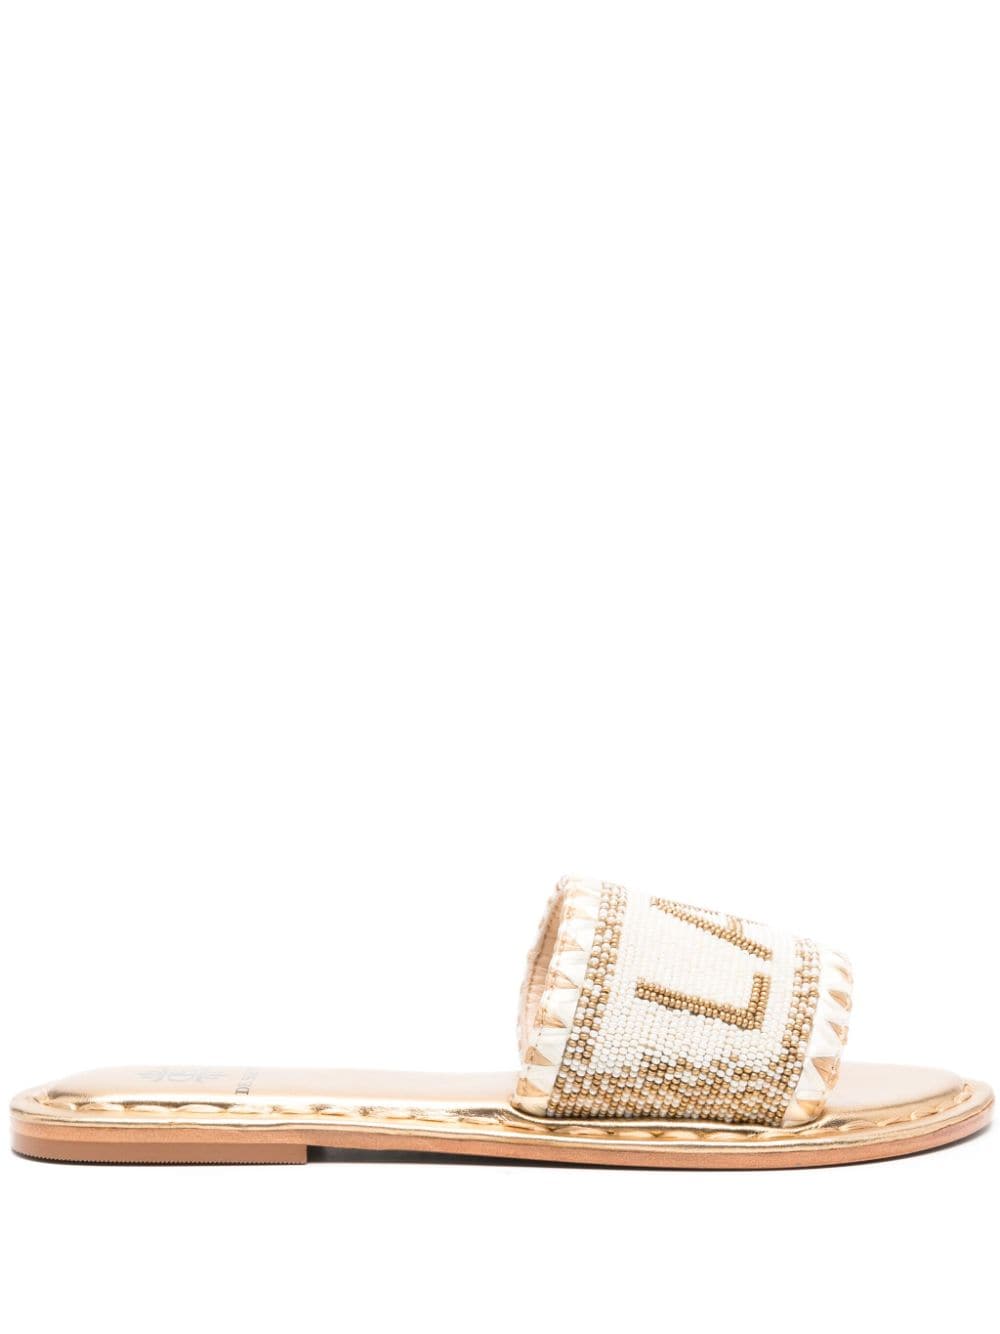 De Siena Shoes Bead-embellished Leather Sandals In Gold